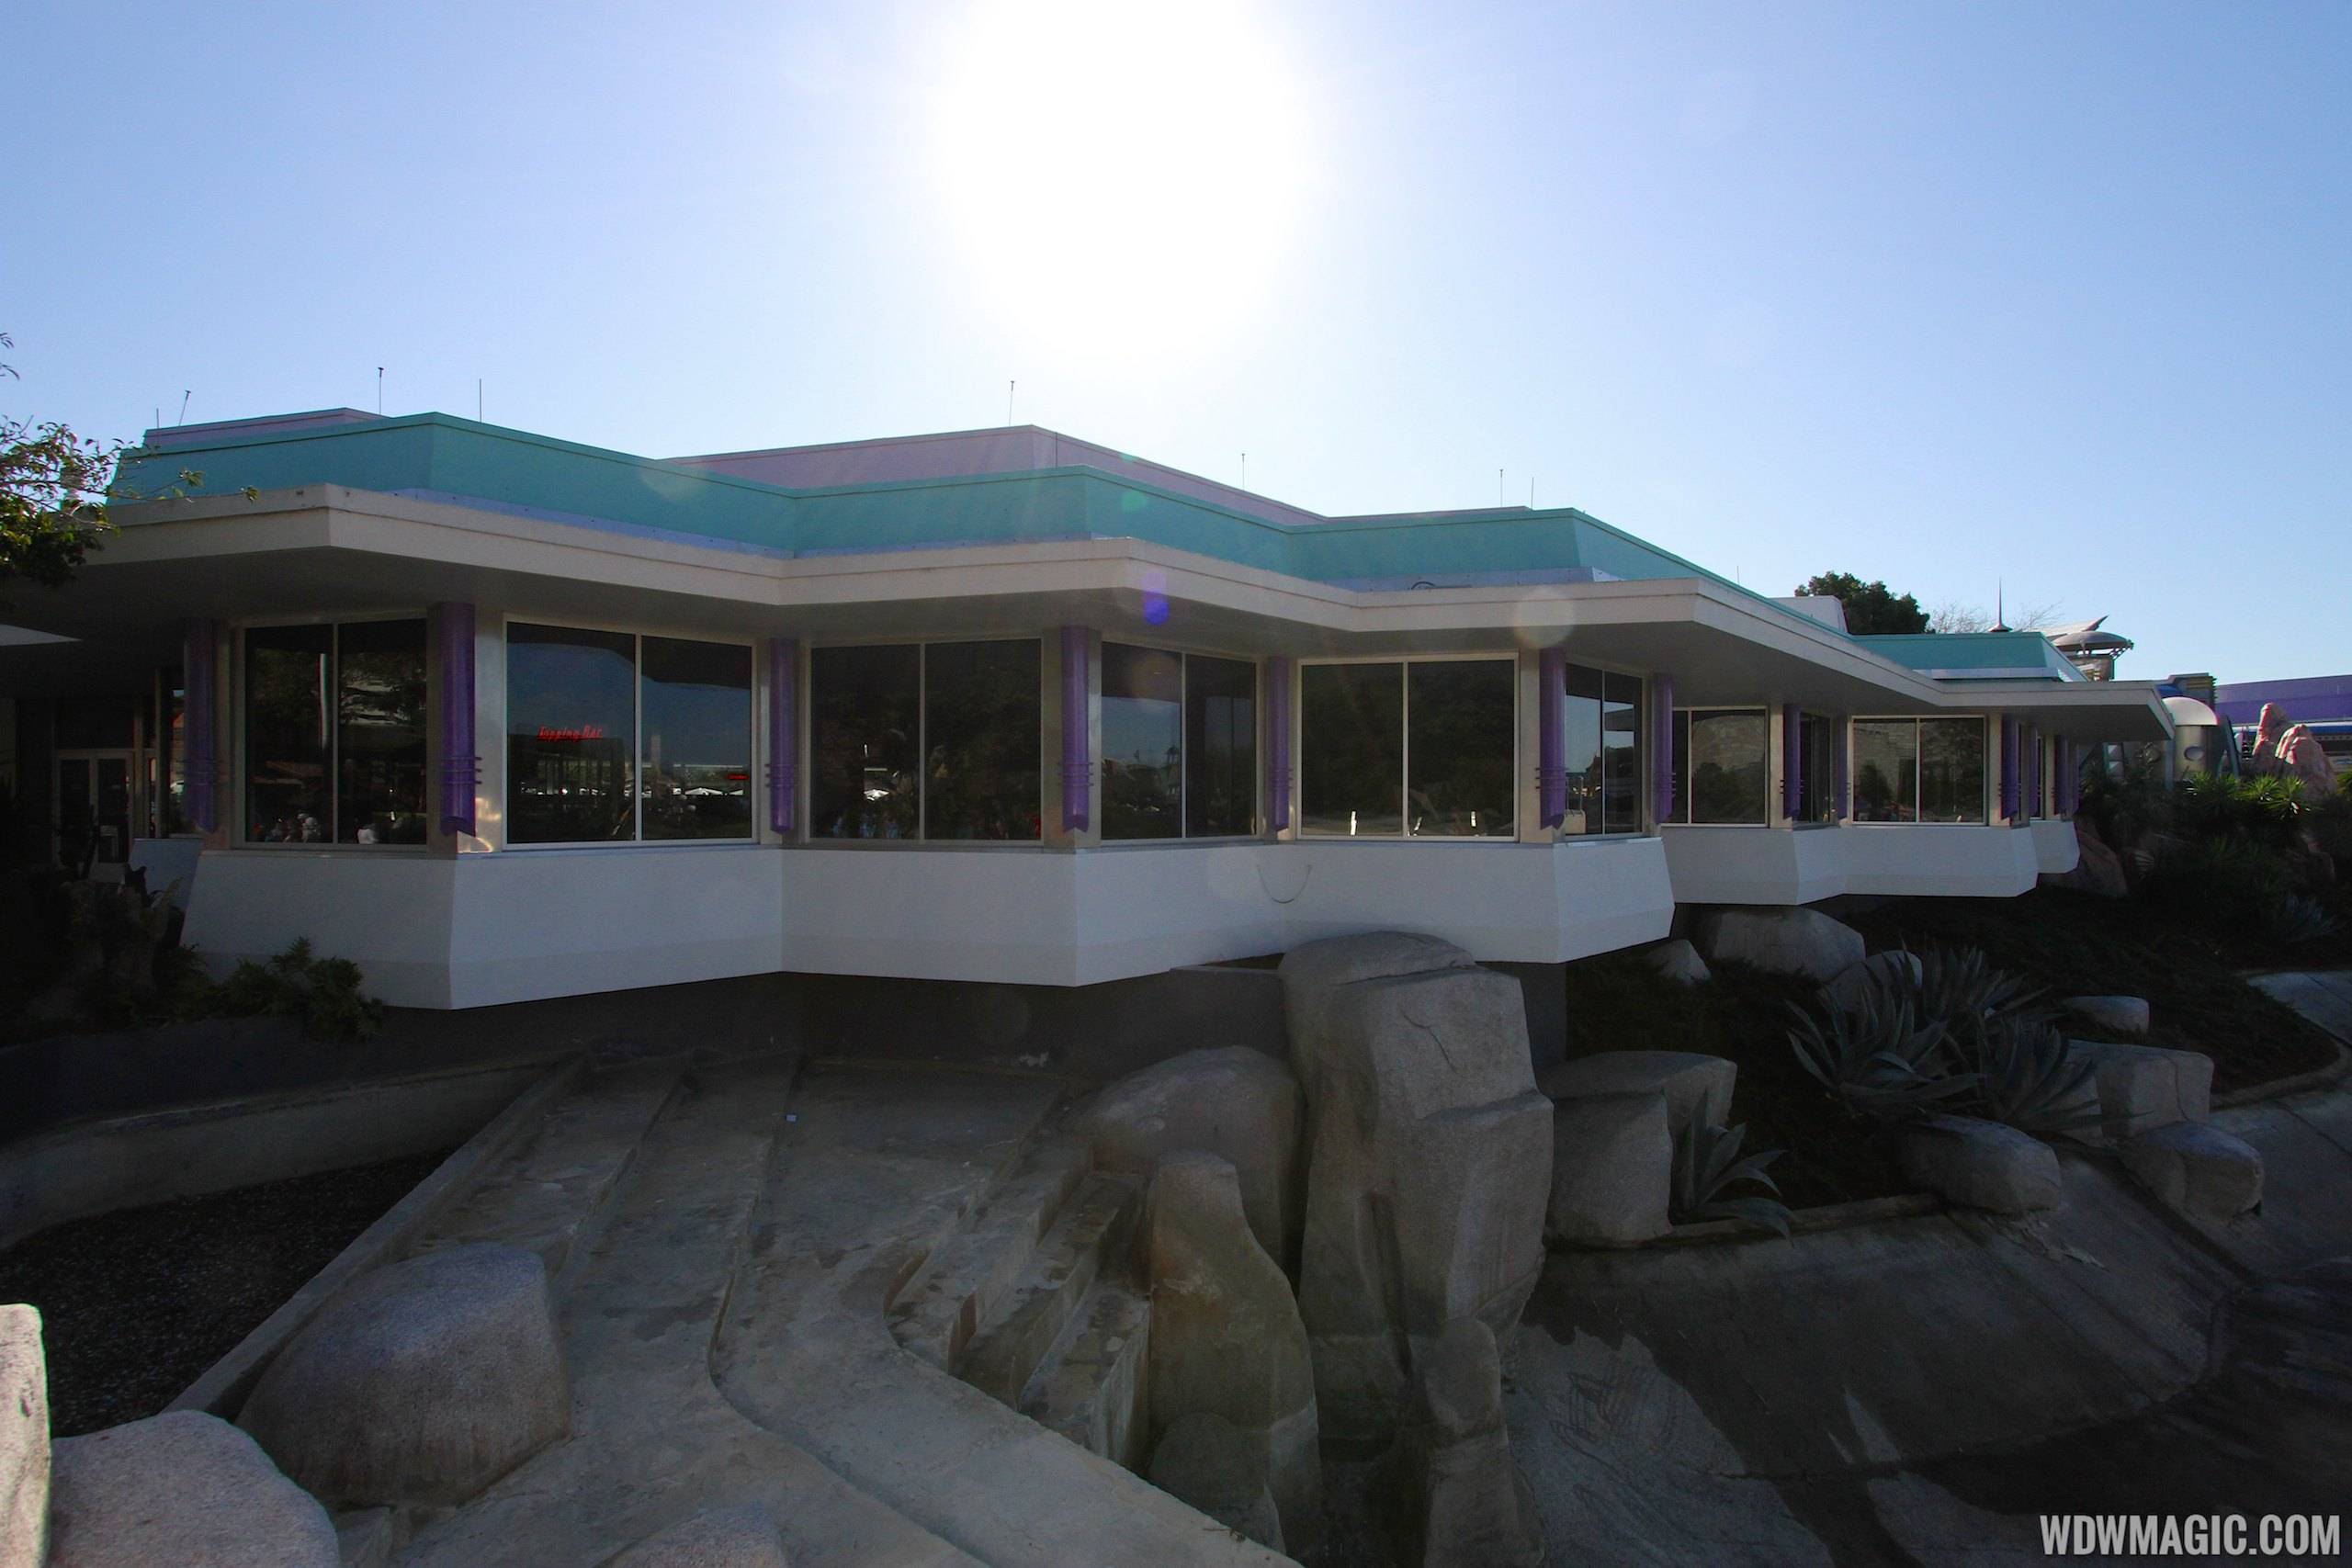 Cosmic Ray's patio enclosed - exterior view